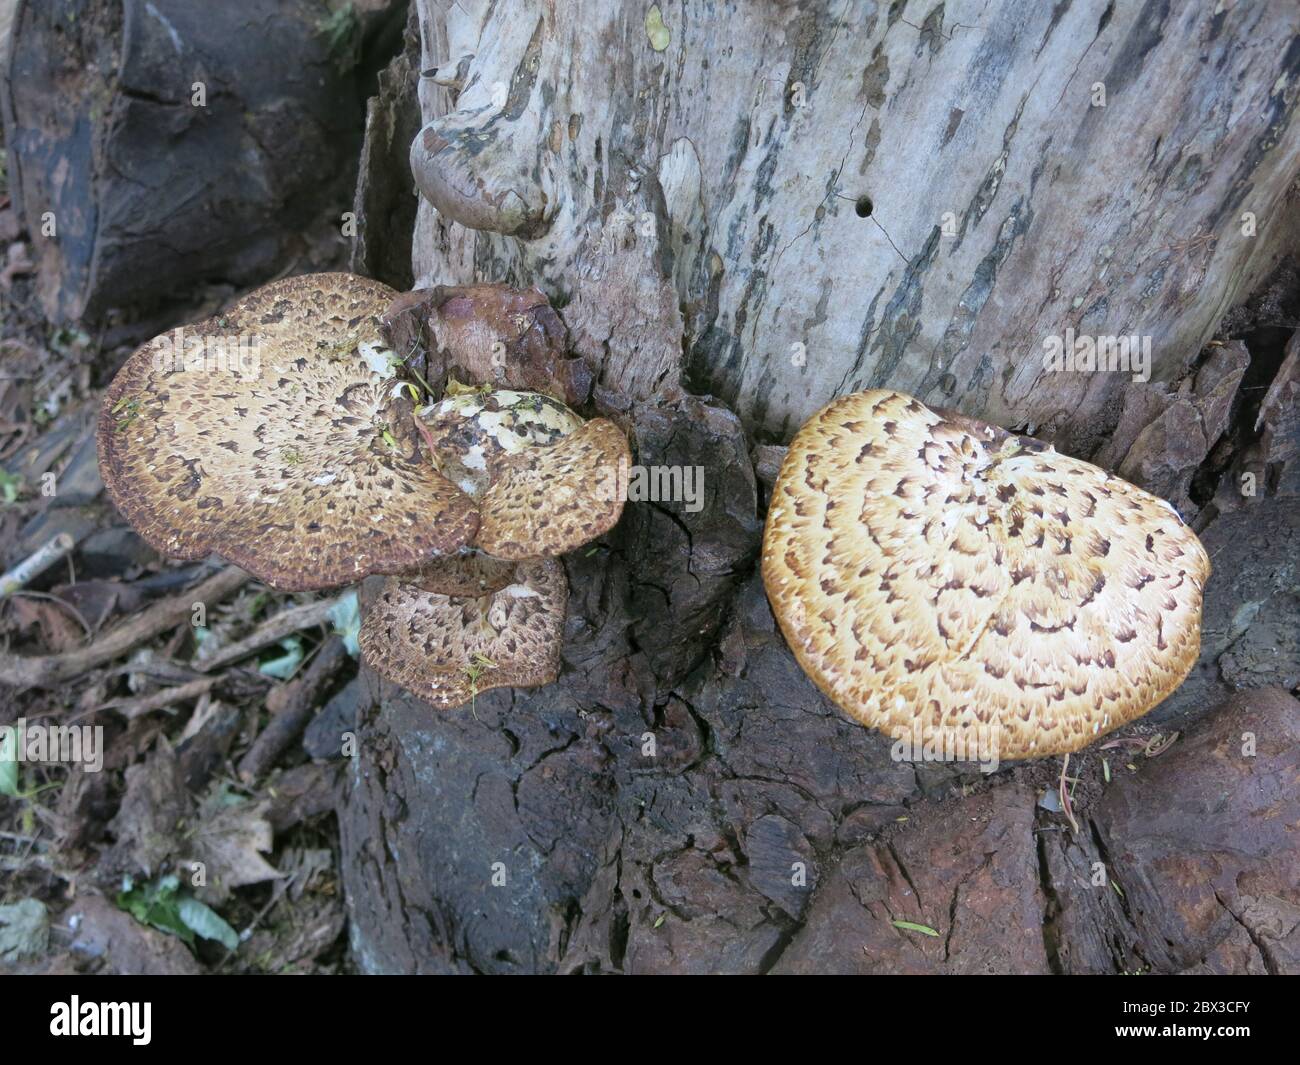 Dryad's Saddle or Pheasant's Back, Polyporus Squamosus, is a type of bracket fungus that grows on dead tree logs in woodland areas. Stock Photo